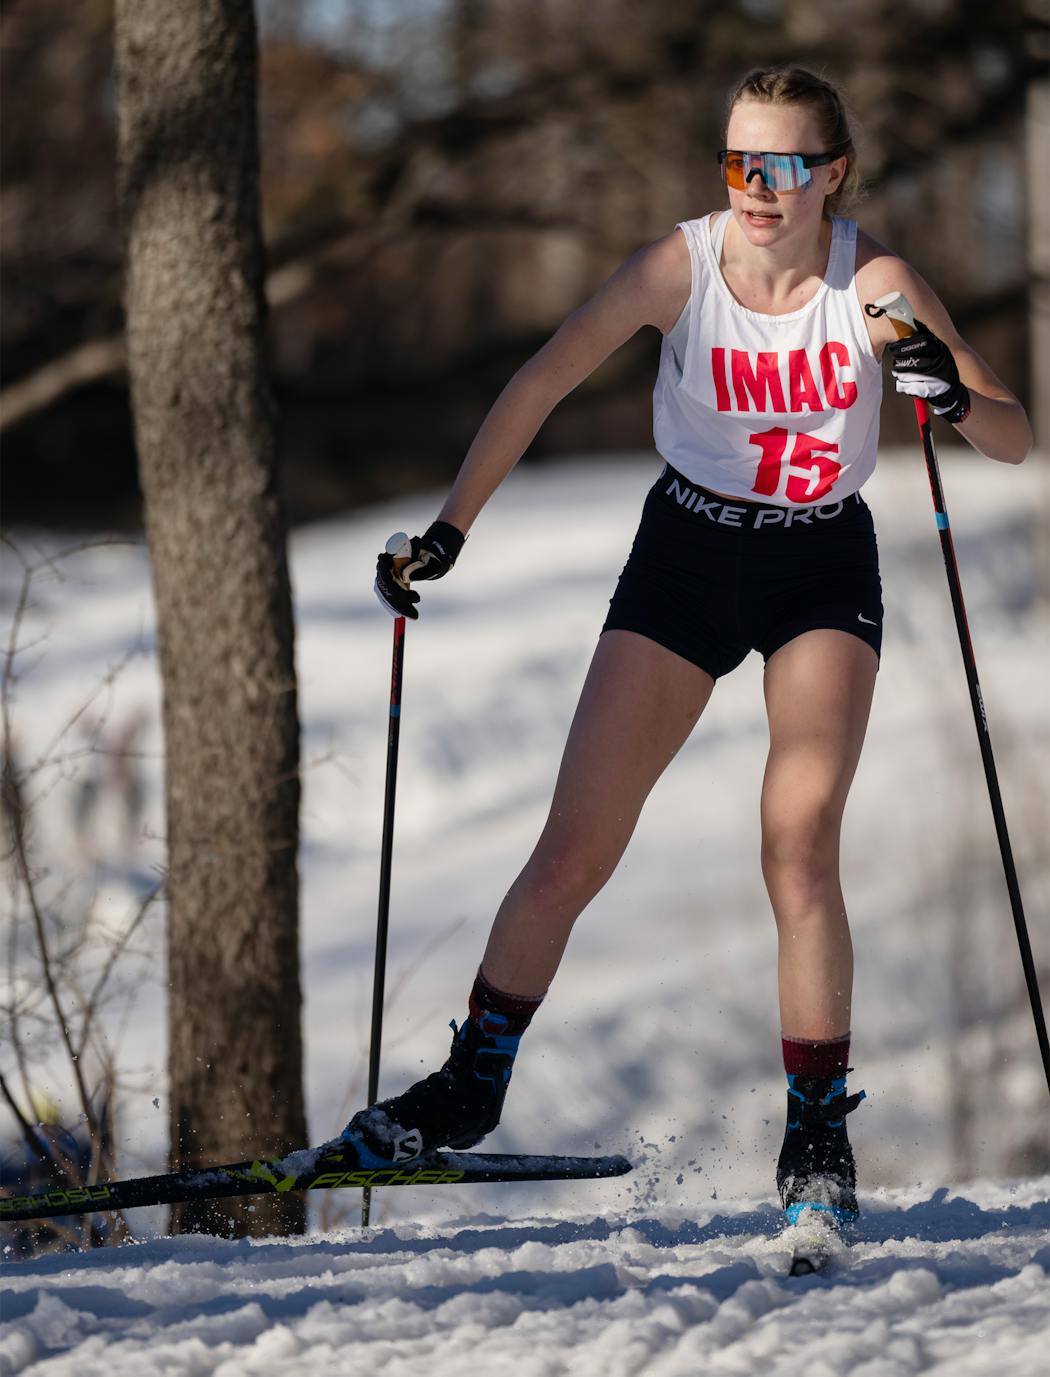 Breck skier Elin Wellmann dressed for the weather in a ski race at Theodore Wirth Regional Park in Minneapolis.